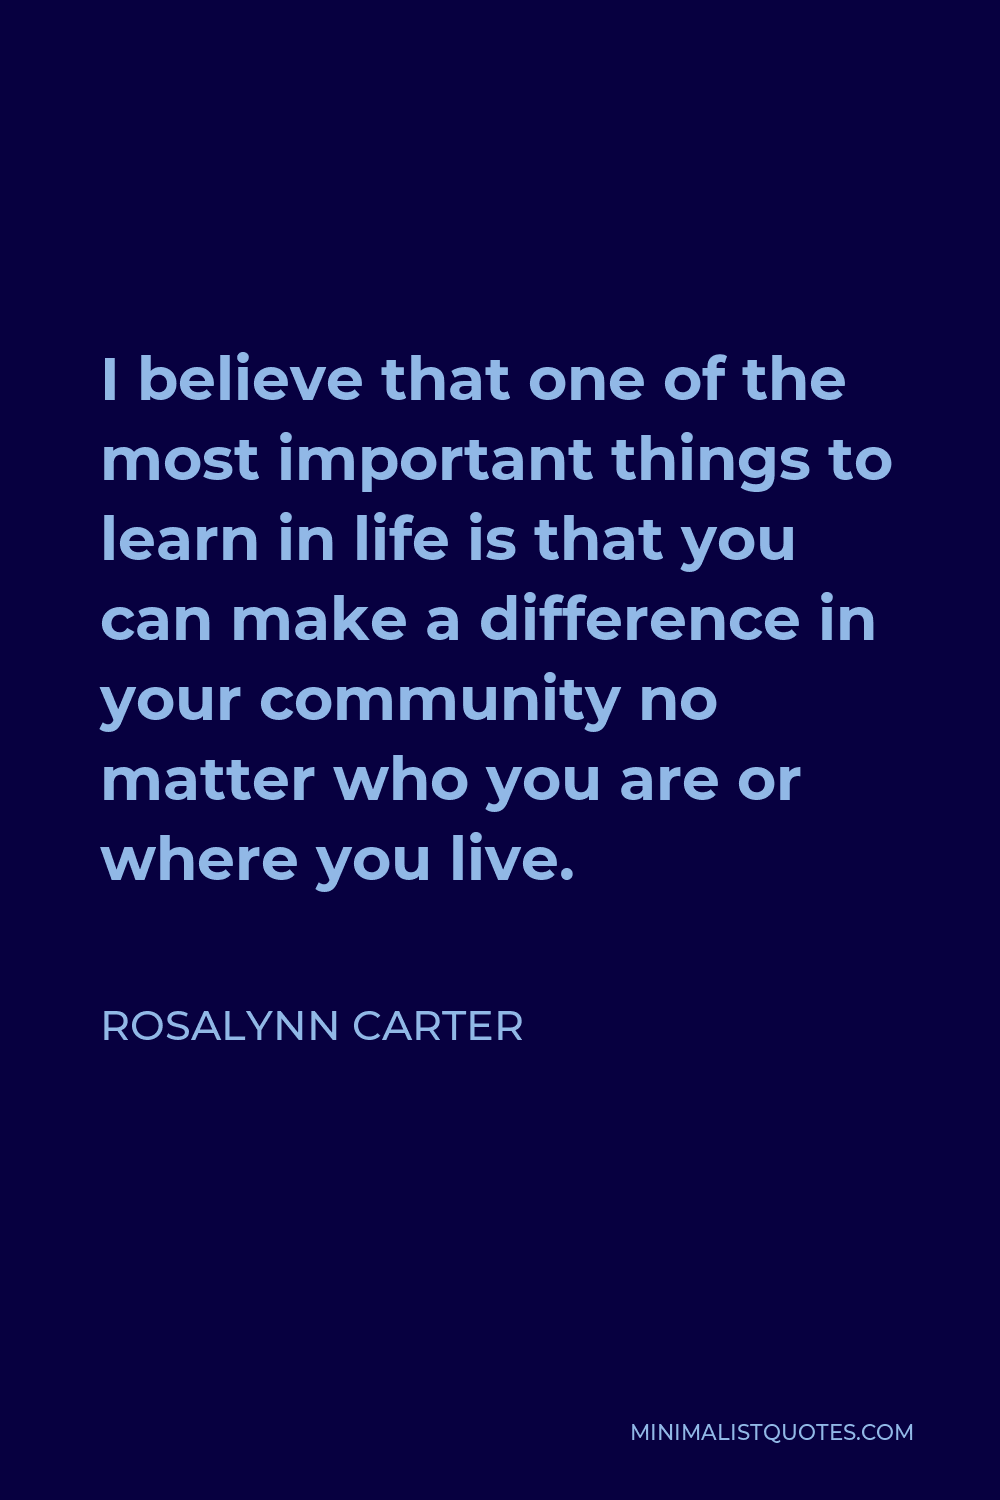 Rosalynn Carter Quote - I believe that one of the most important things to learn in life is that you can make a difference in your community no matter who you are or where you live.